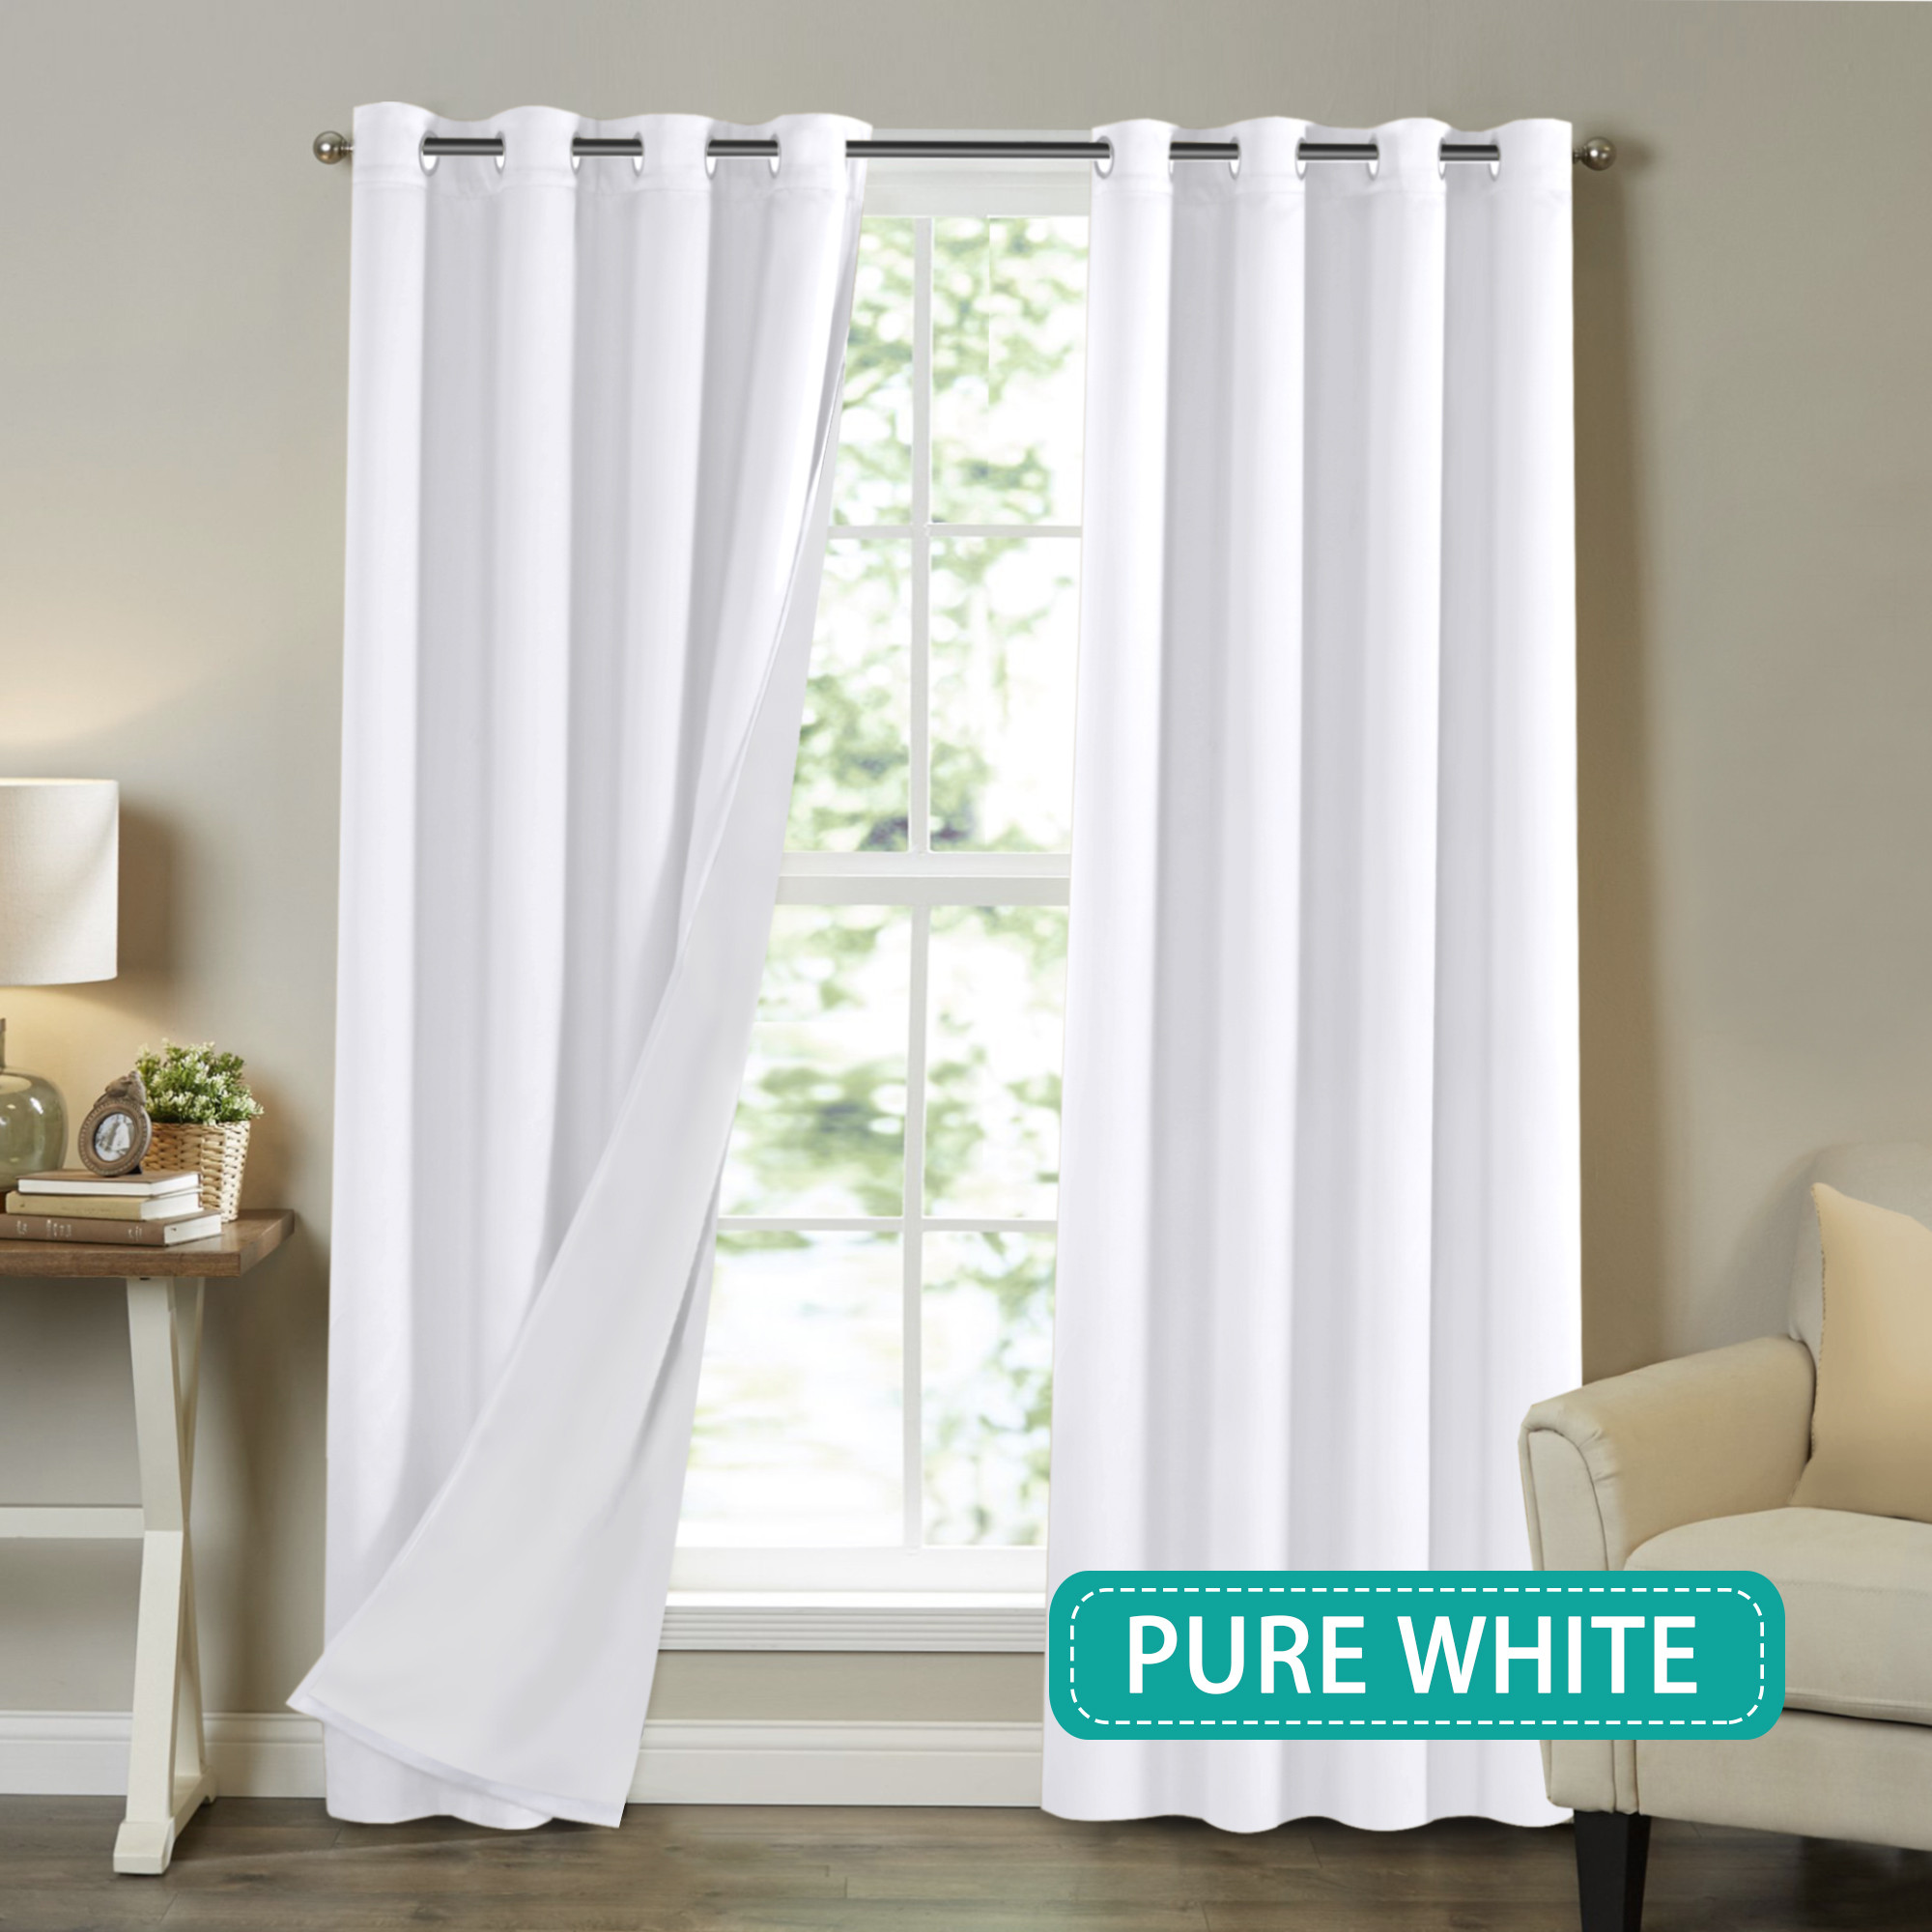 Walmart Curtains For Living Room
 Pure White Blackout Curtains for Bedroom Living Room Faux